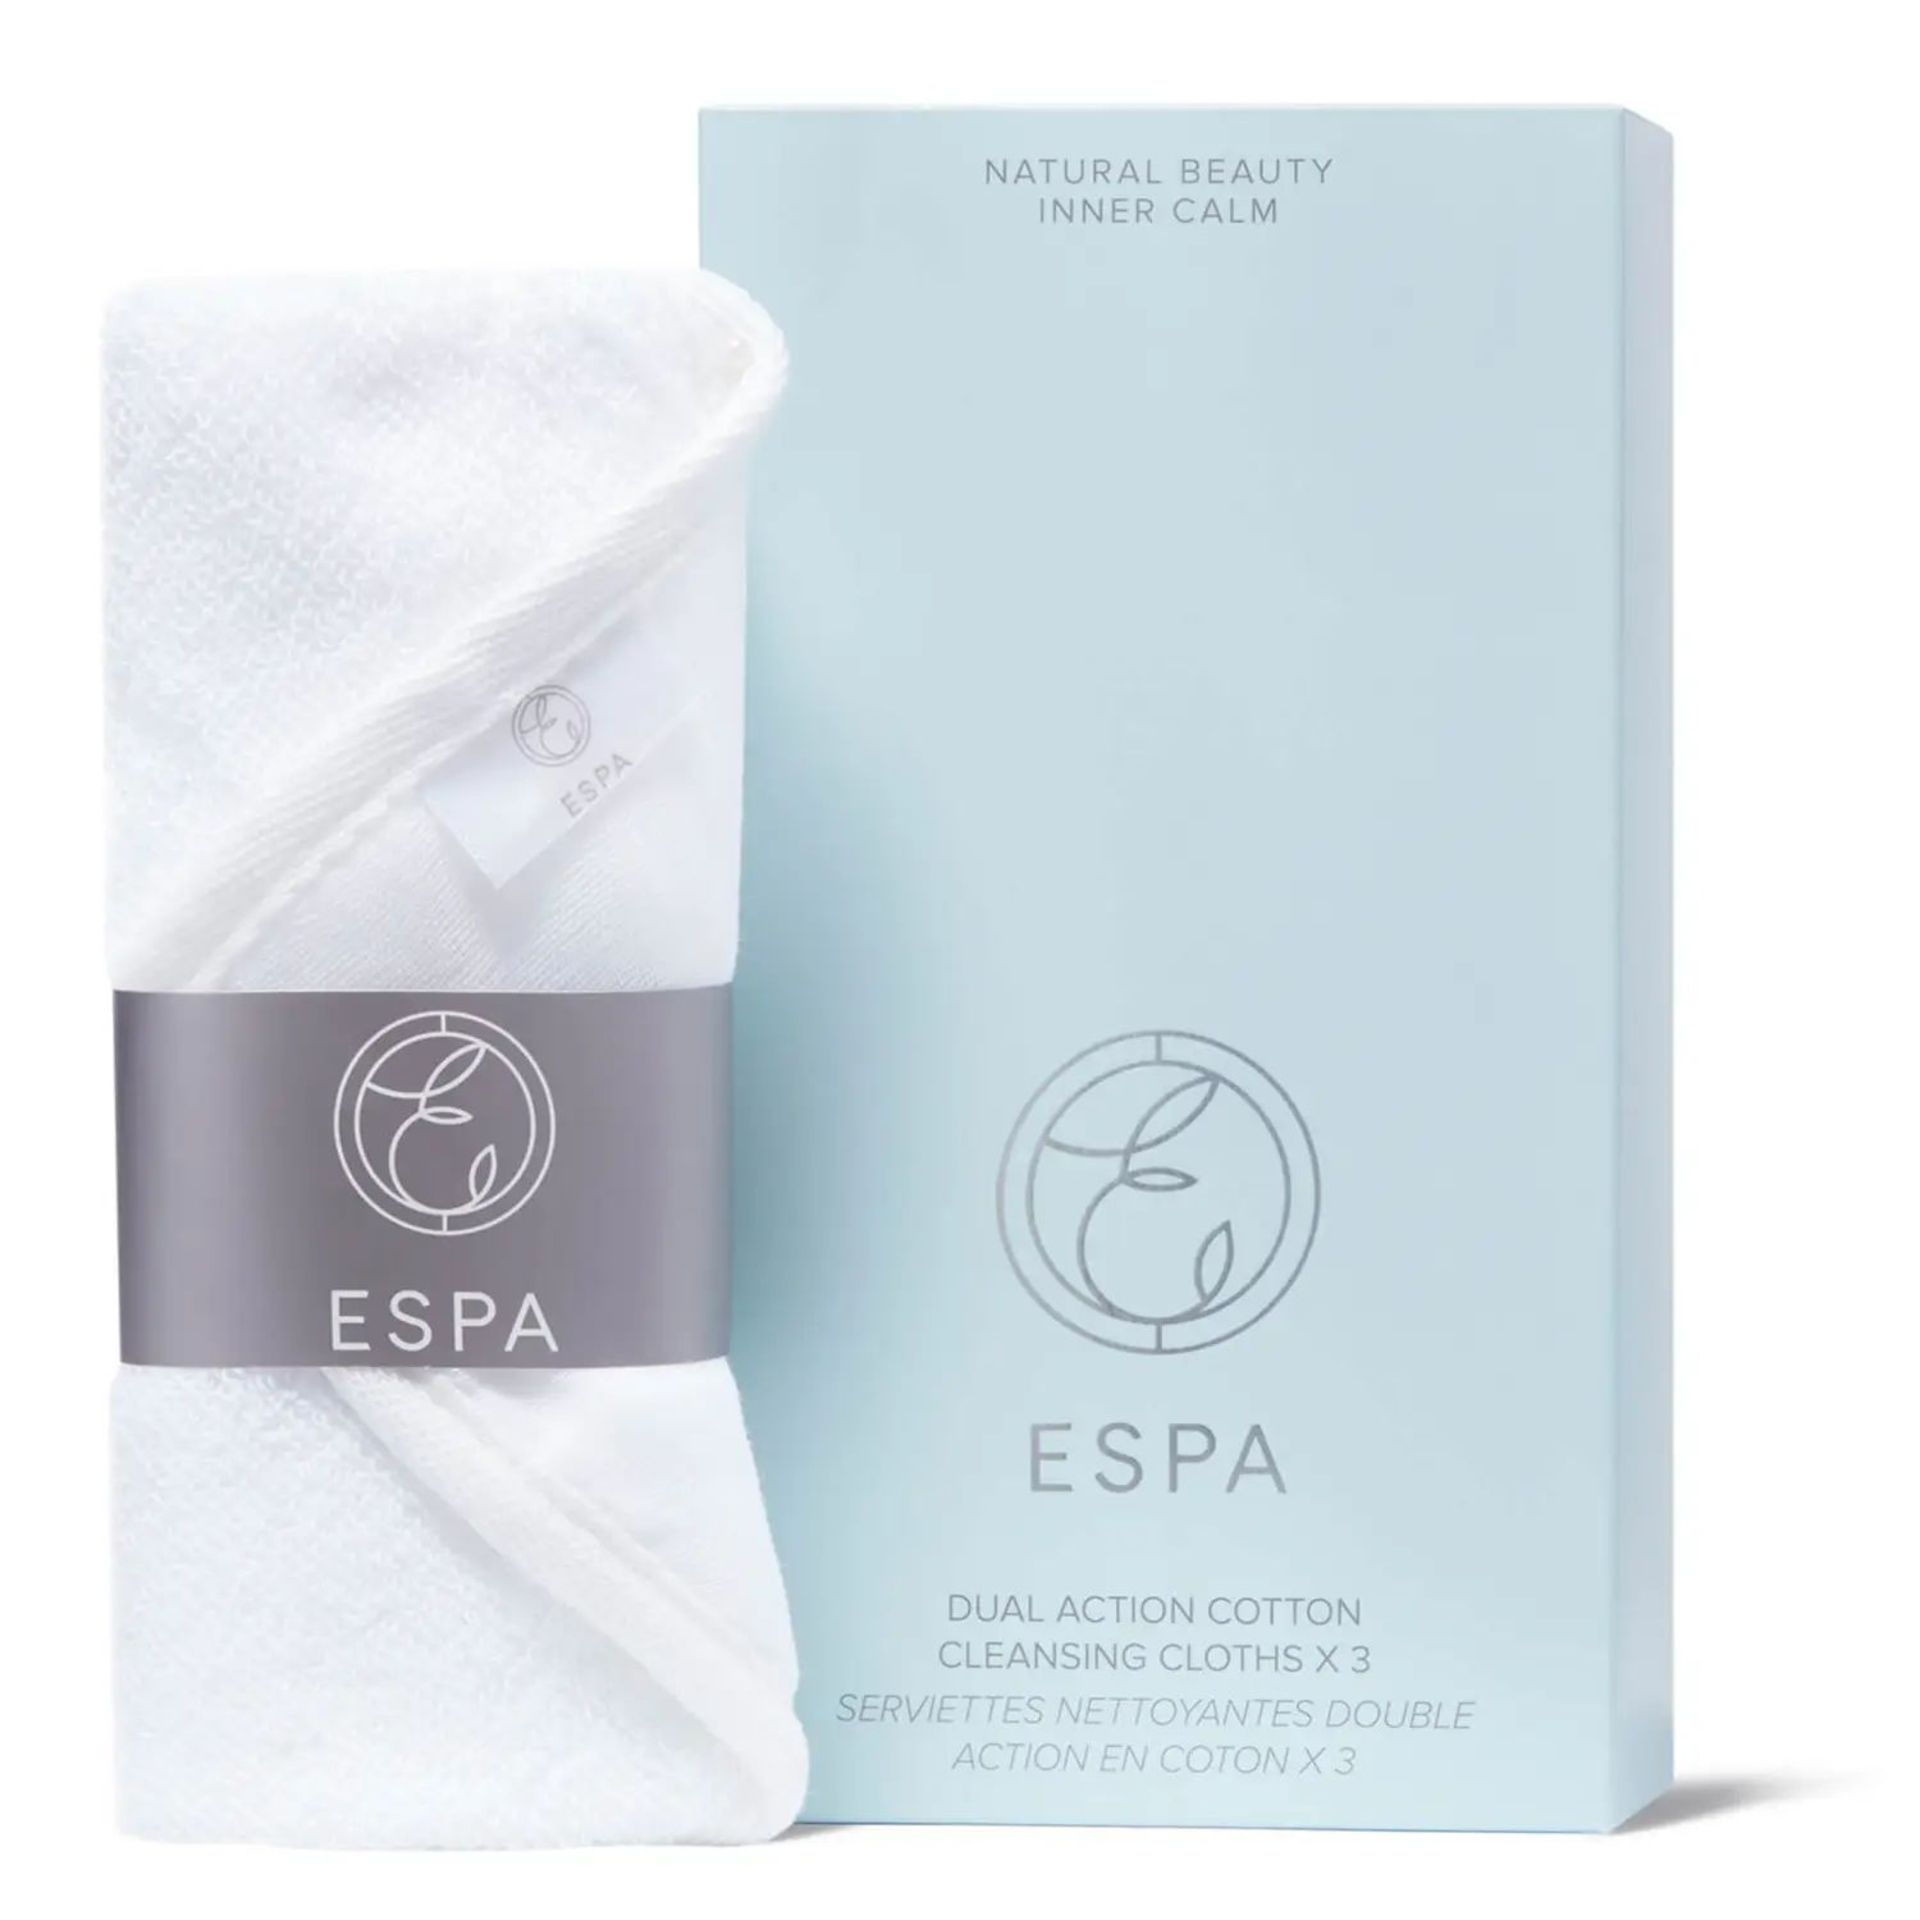 10x NEW ESPA Duel Action Cleansing Cloths Set Of 3. RRP £20 EACH. EBR4. After washing with our